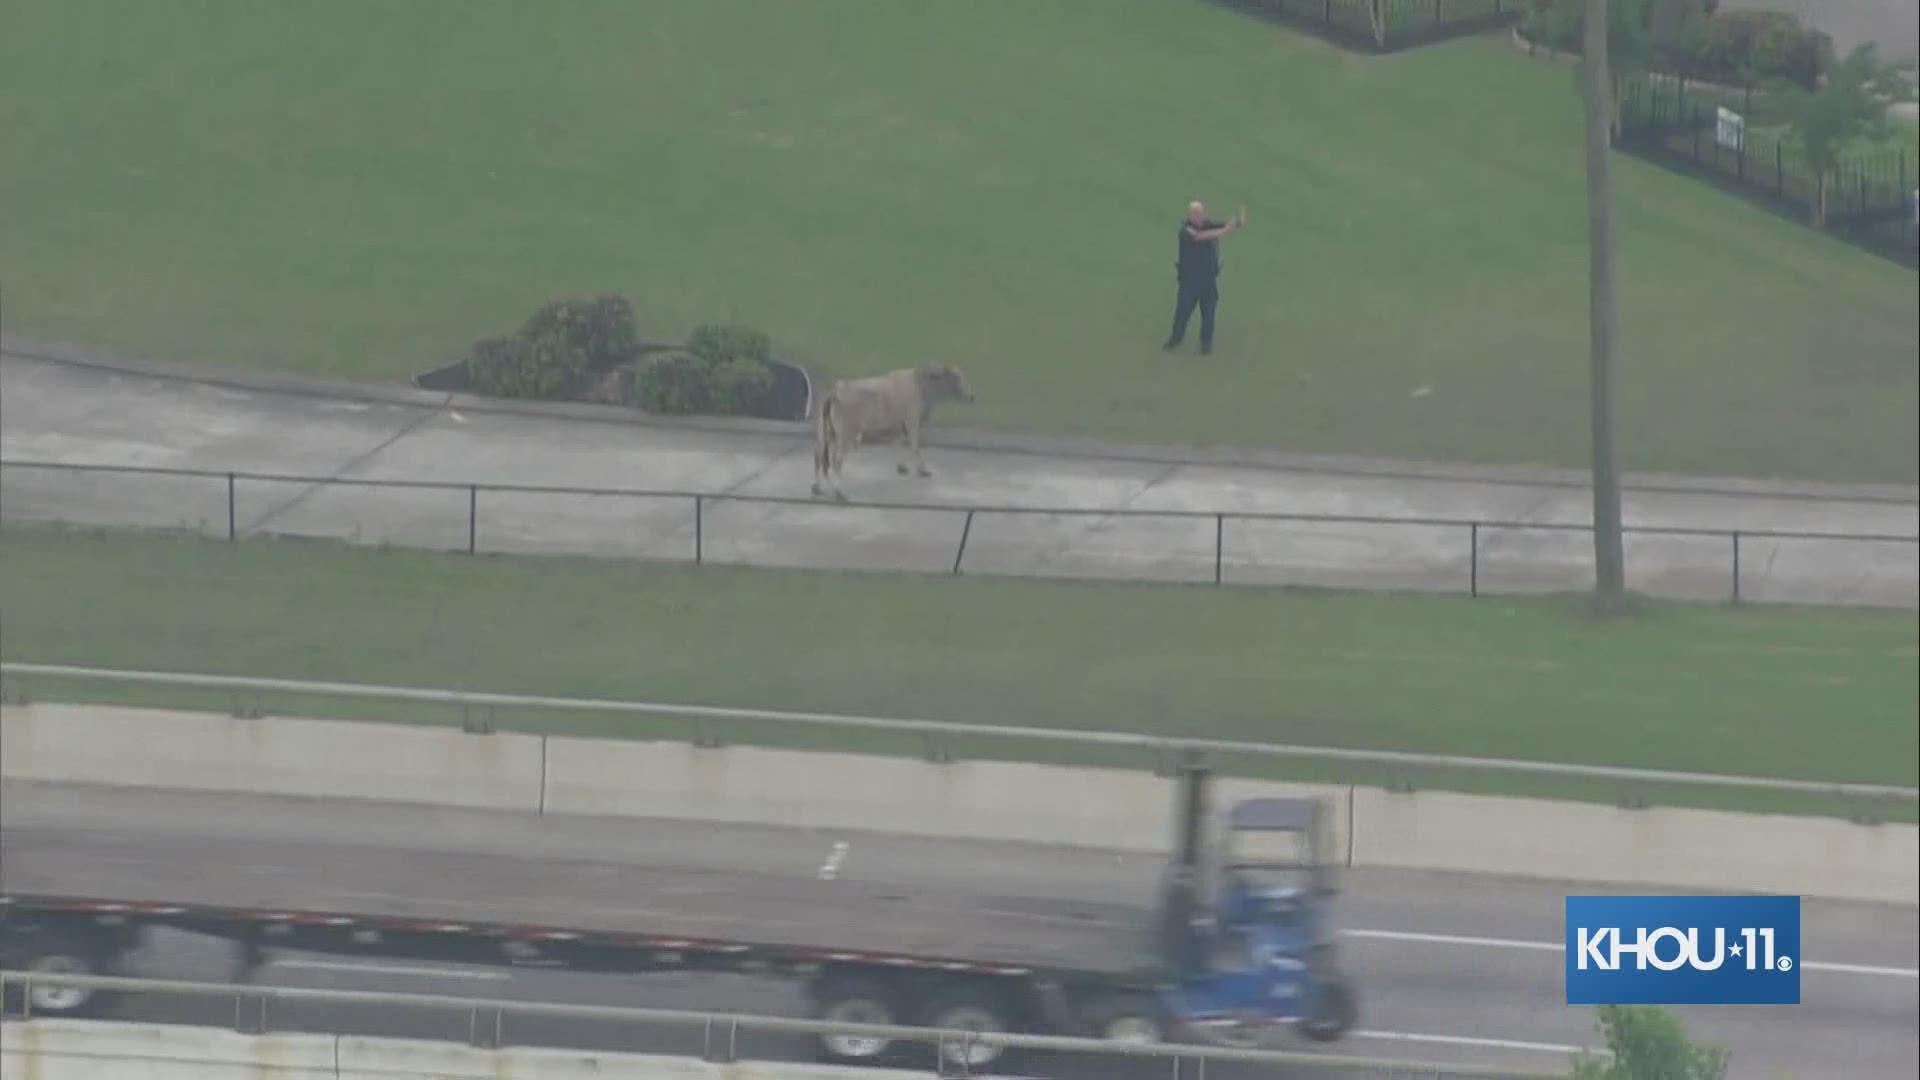 The cow was not hurt — it eventually got off the freeway and went to rest at a nearby cemetery.